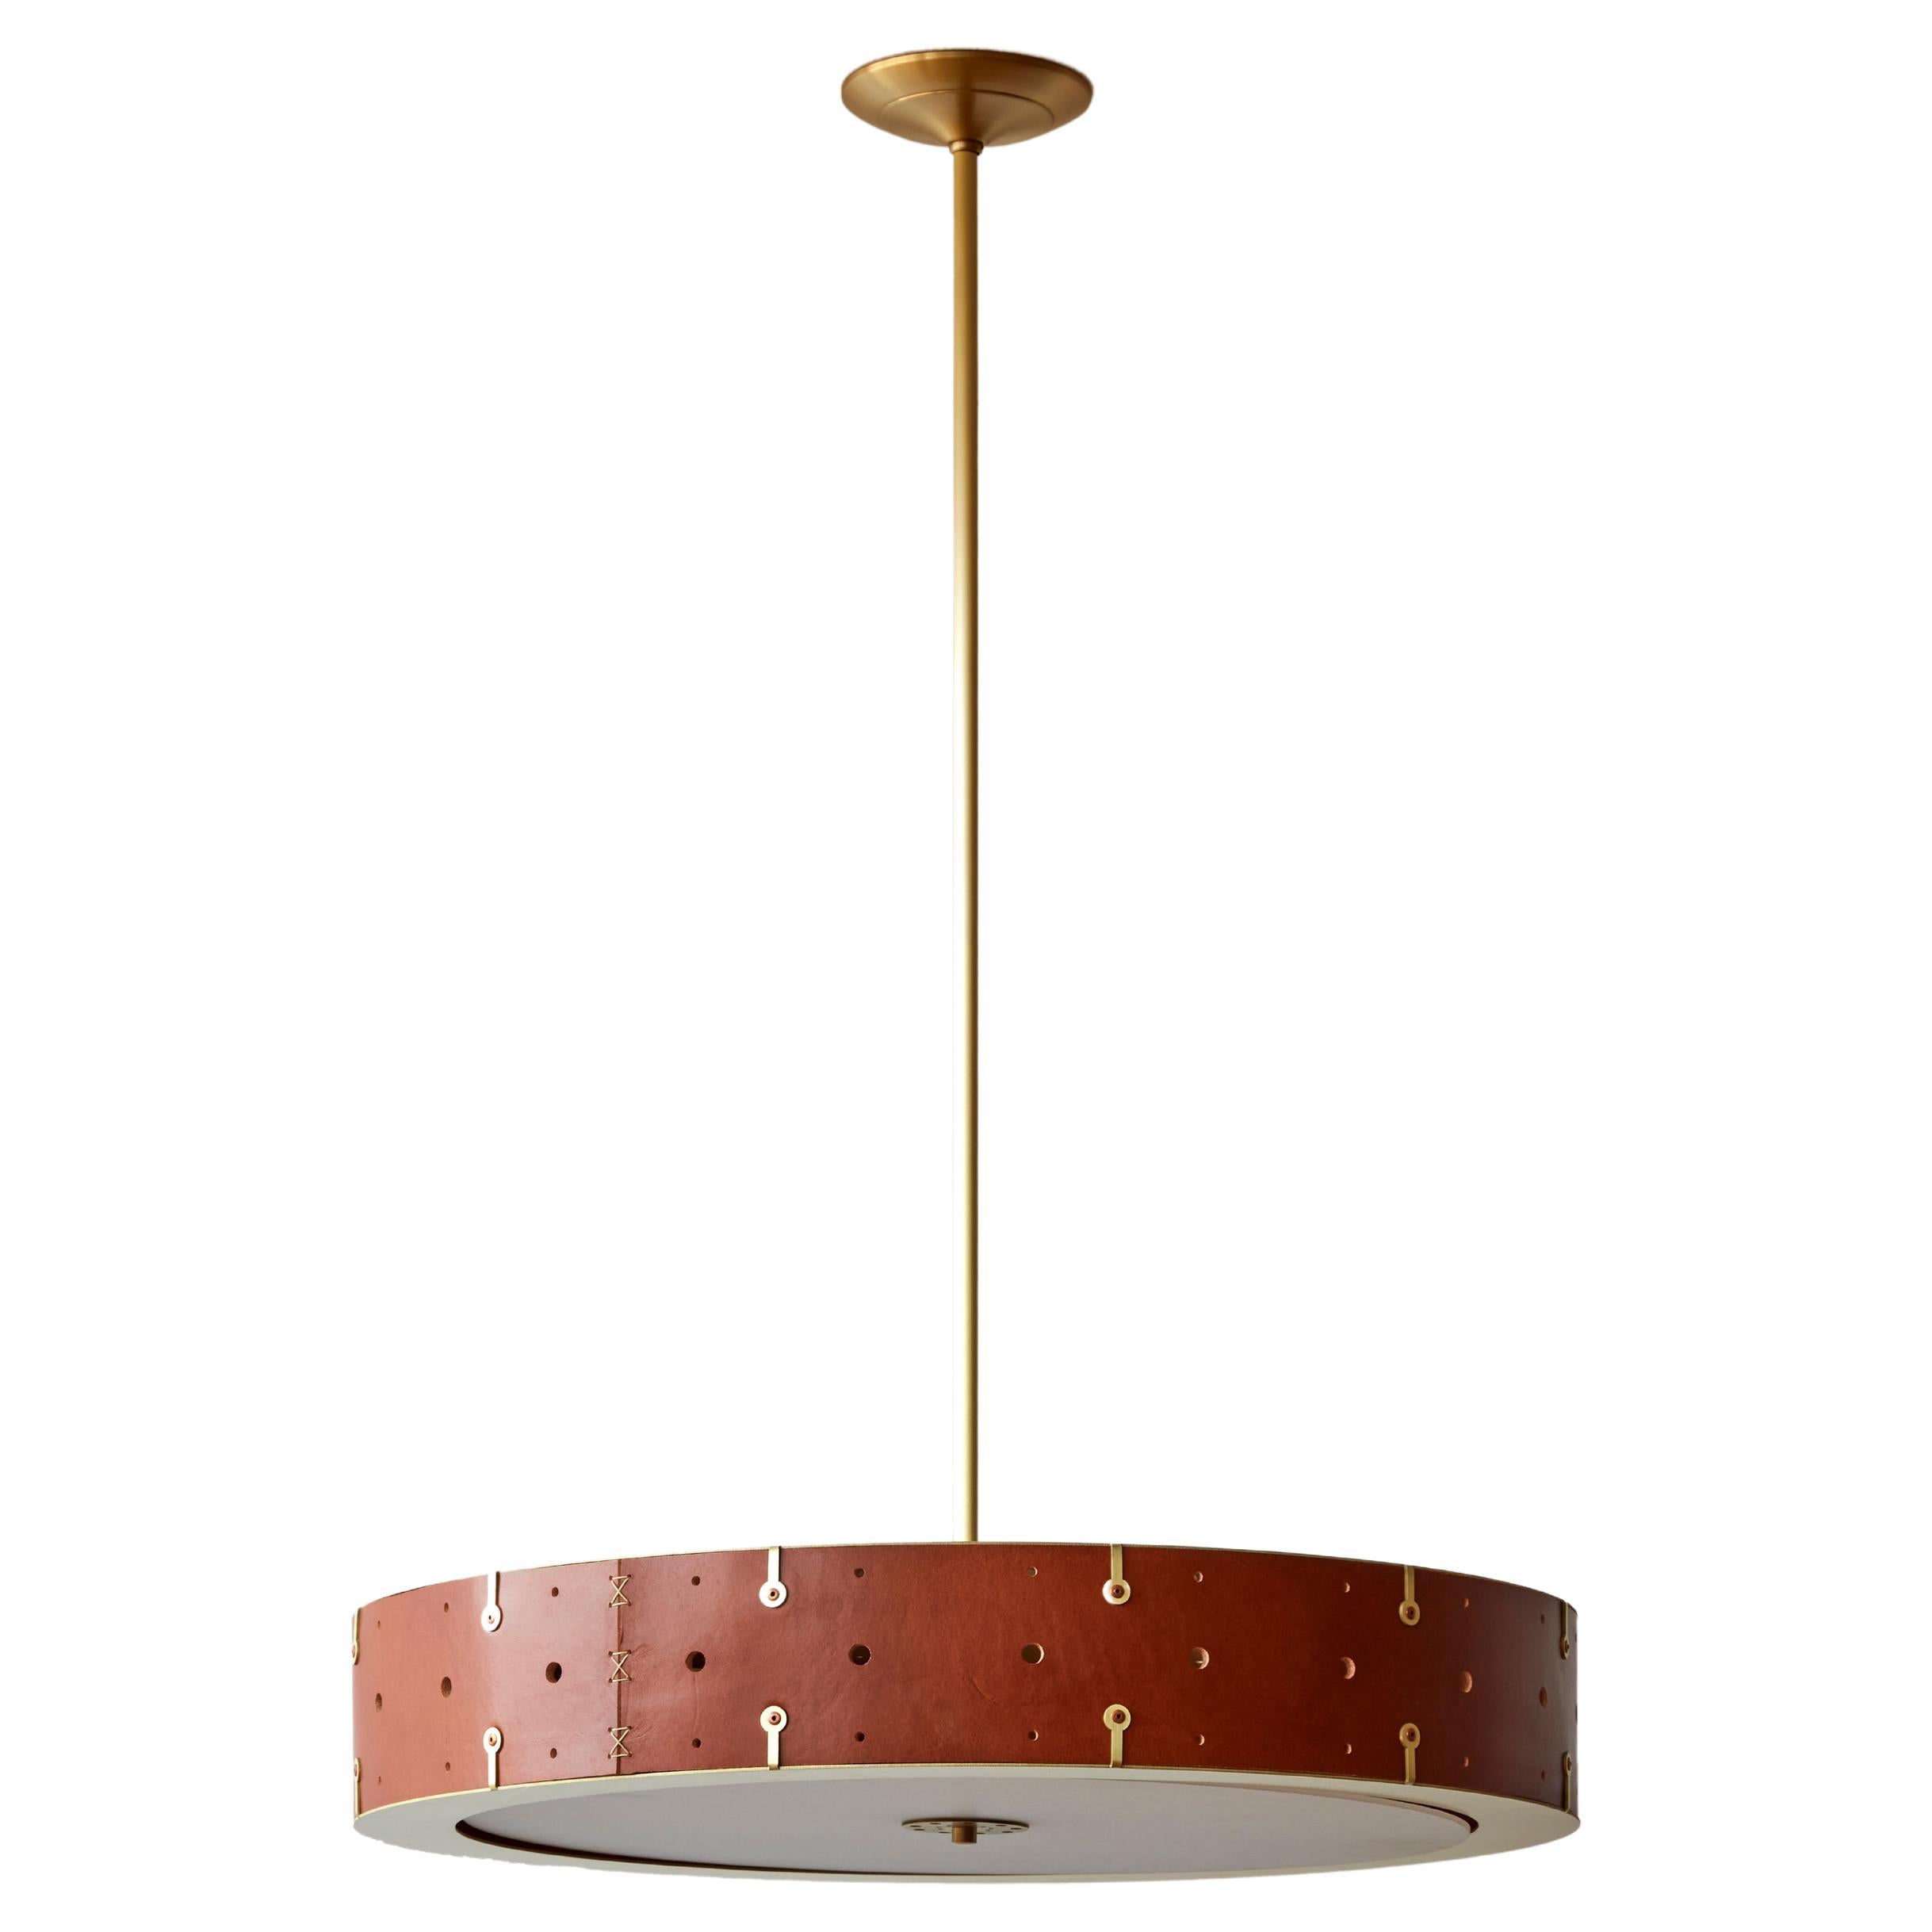 Tan Leather and Satin Brass Sarah Ceiling Pendant 24" Drum